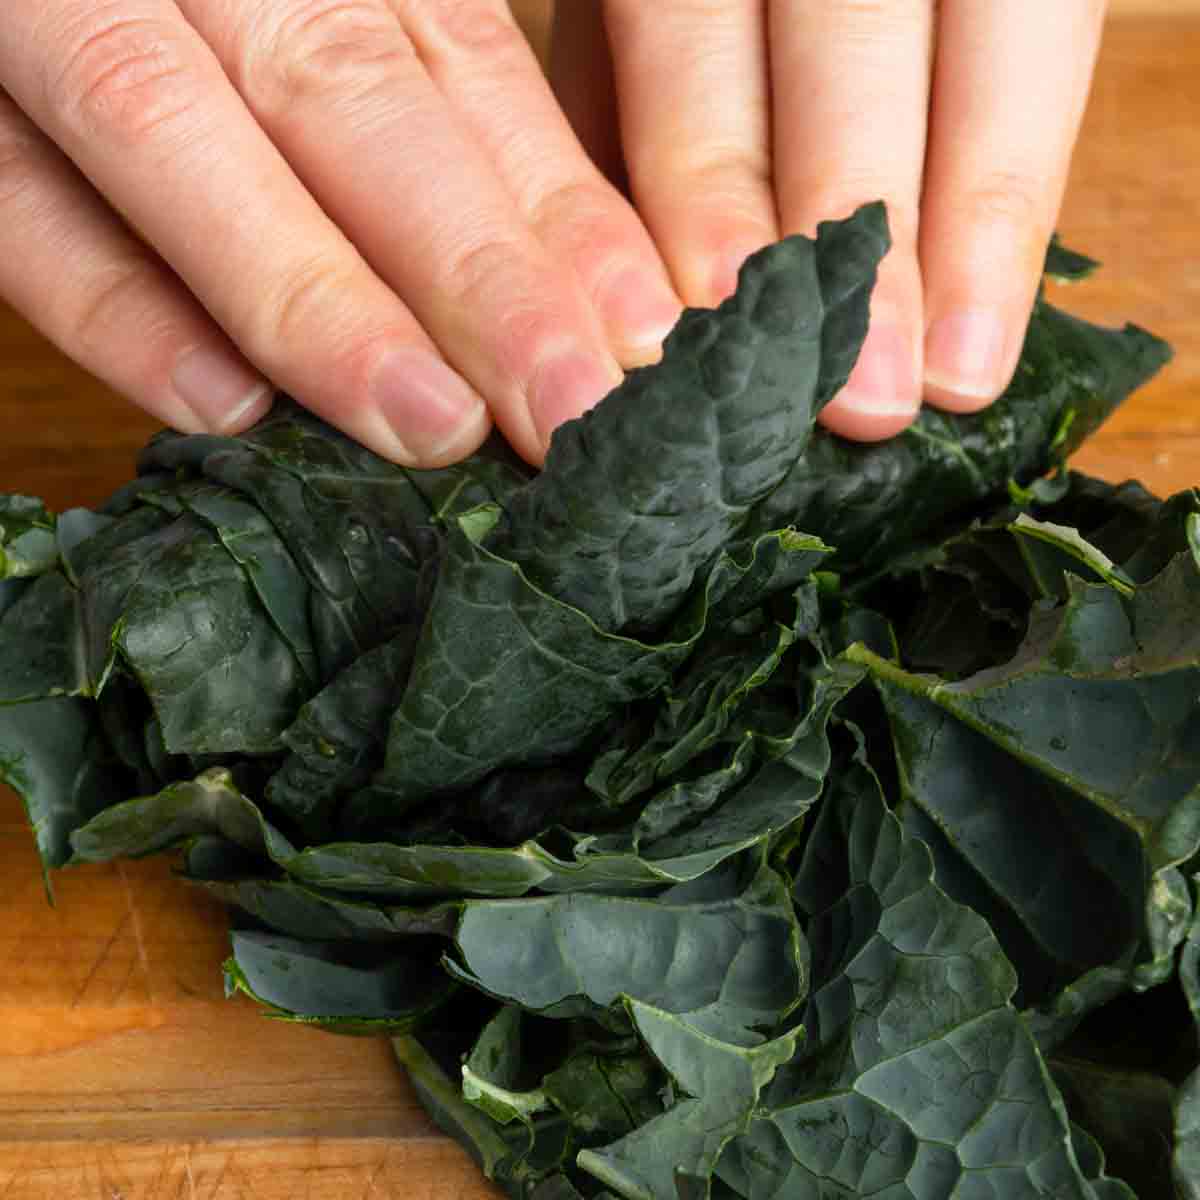 Rolling kale leaves up to chiffonade them.